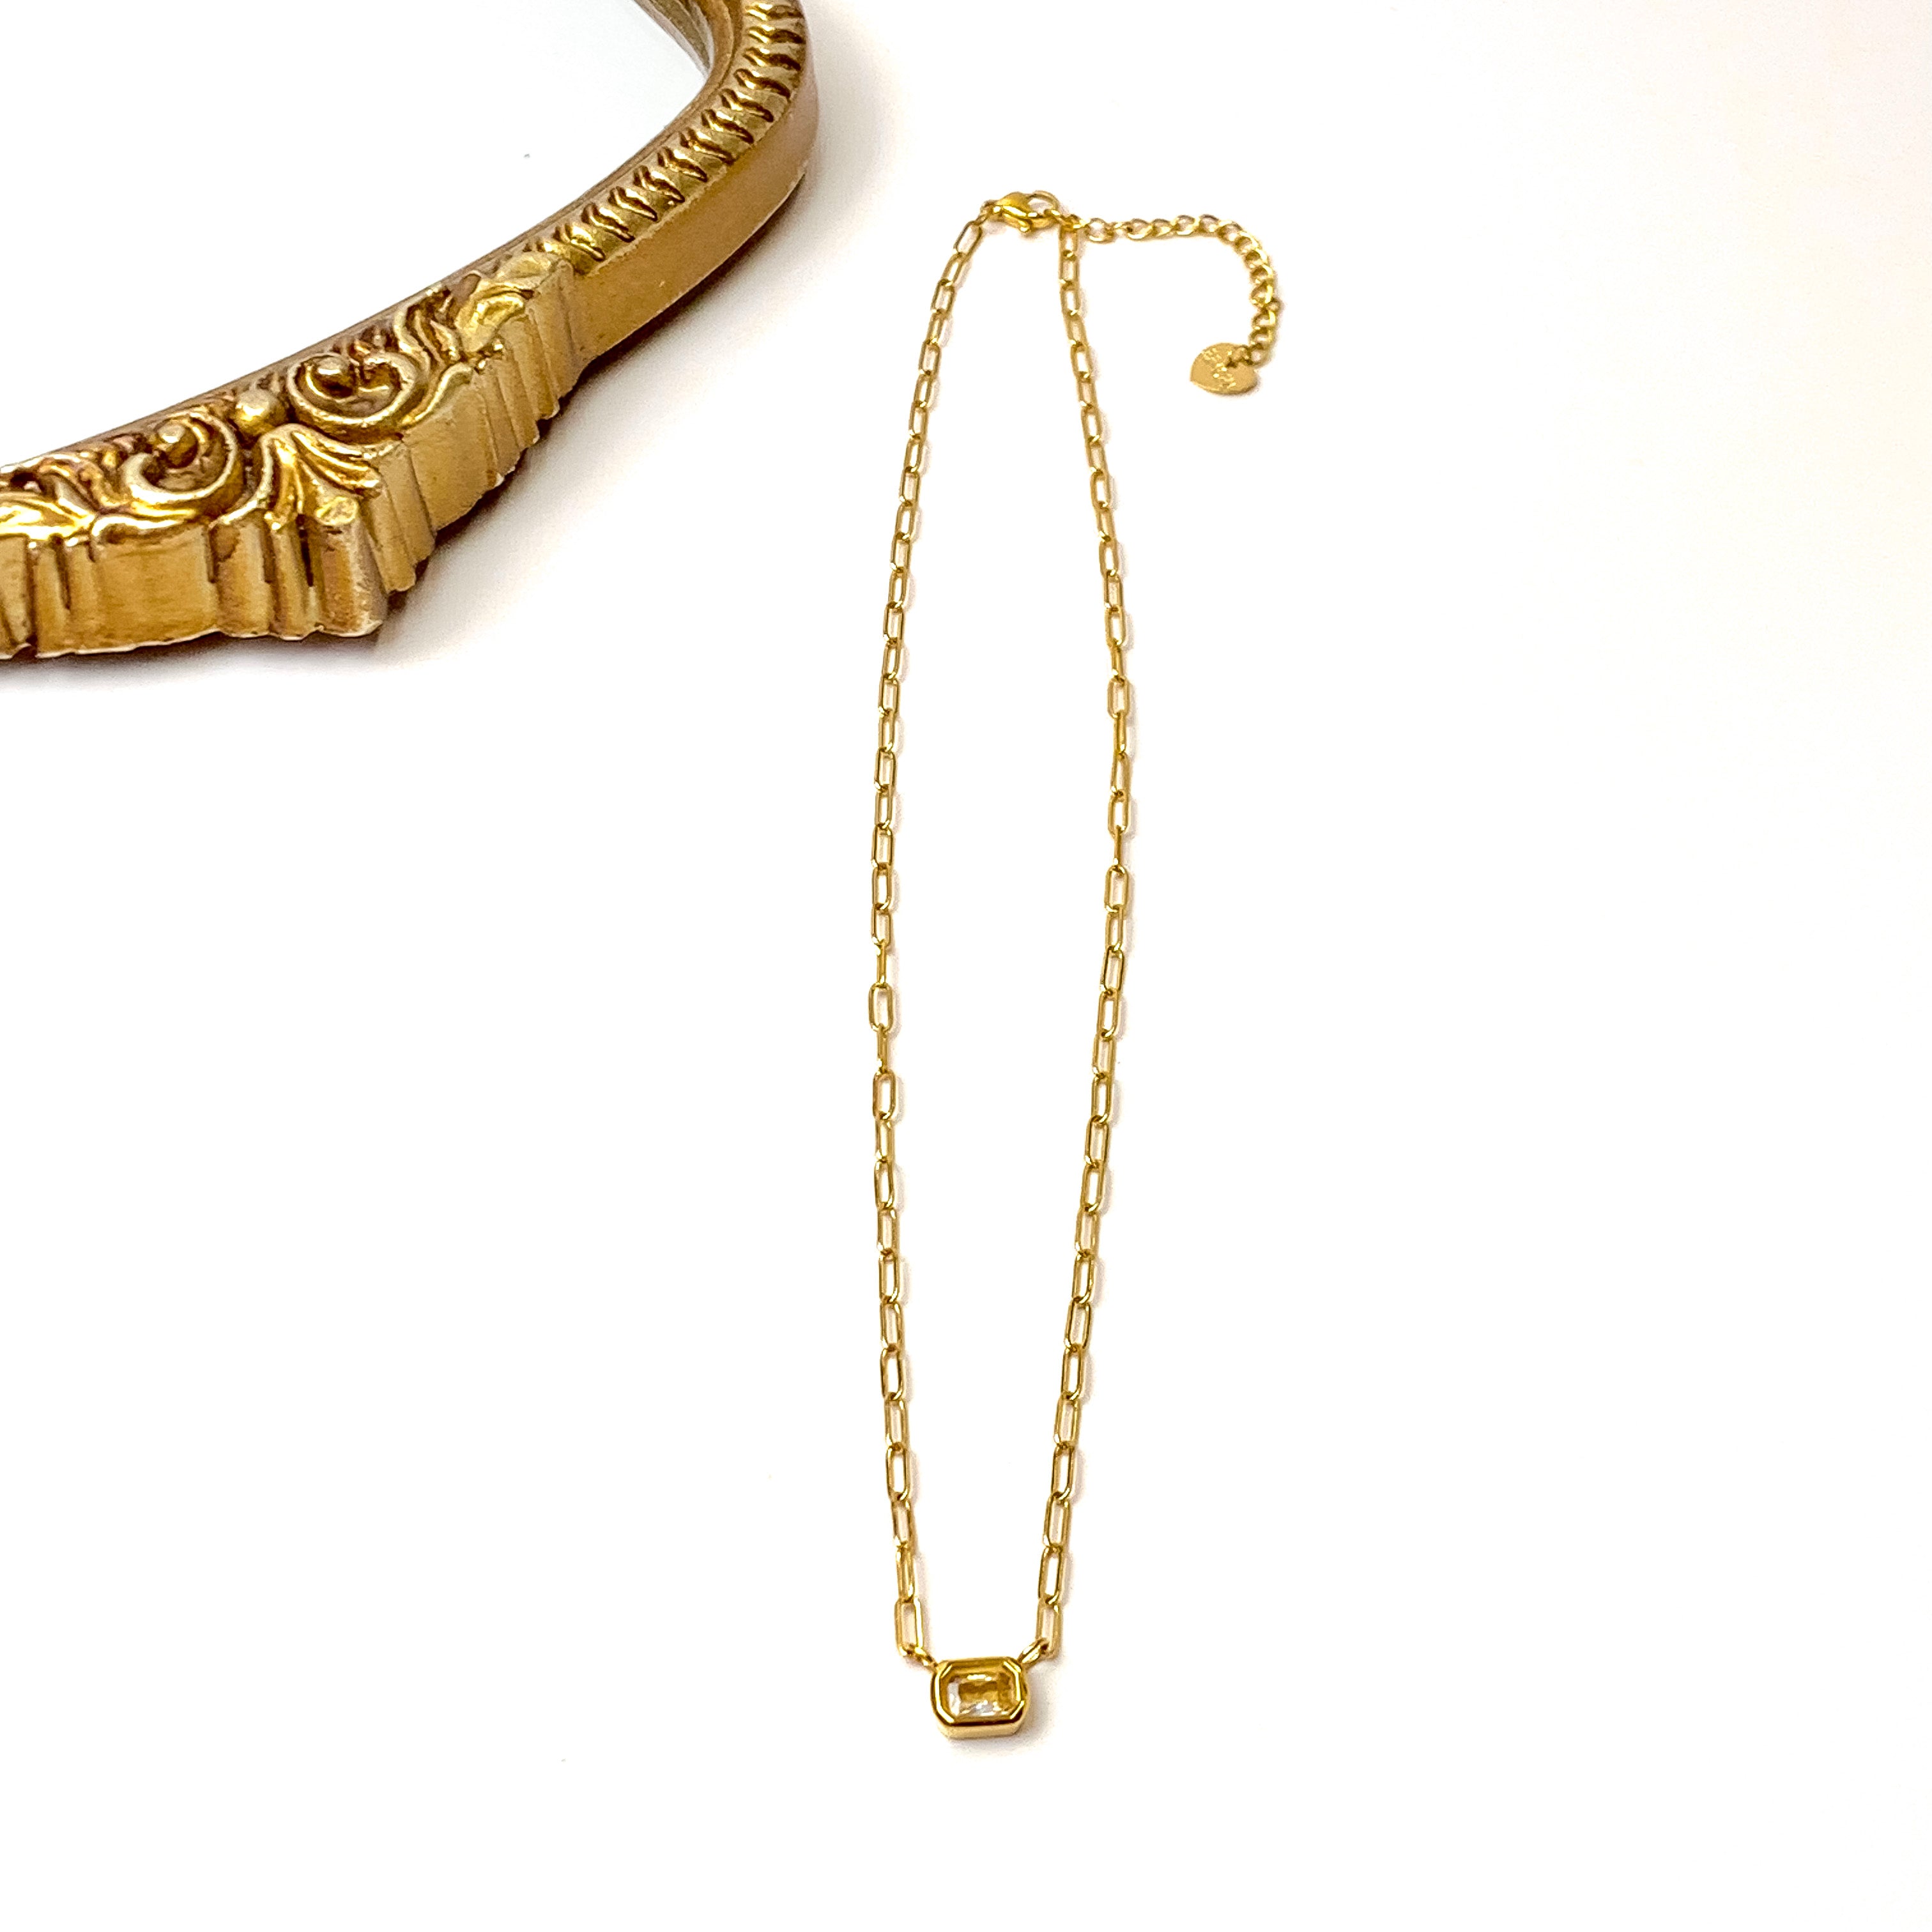 Bracha | Lori Gold Tone Necklace - Giddy Up Glamour Boutique